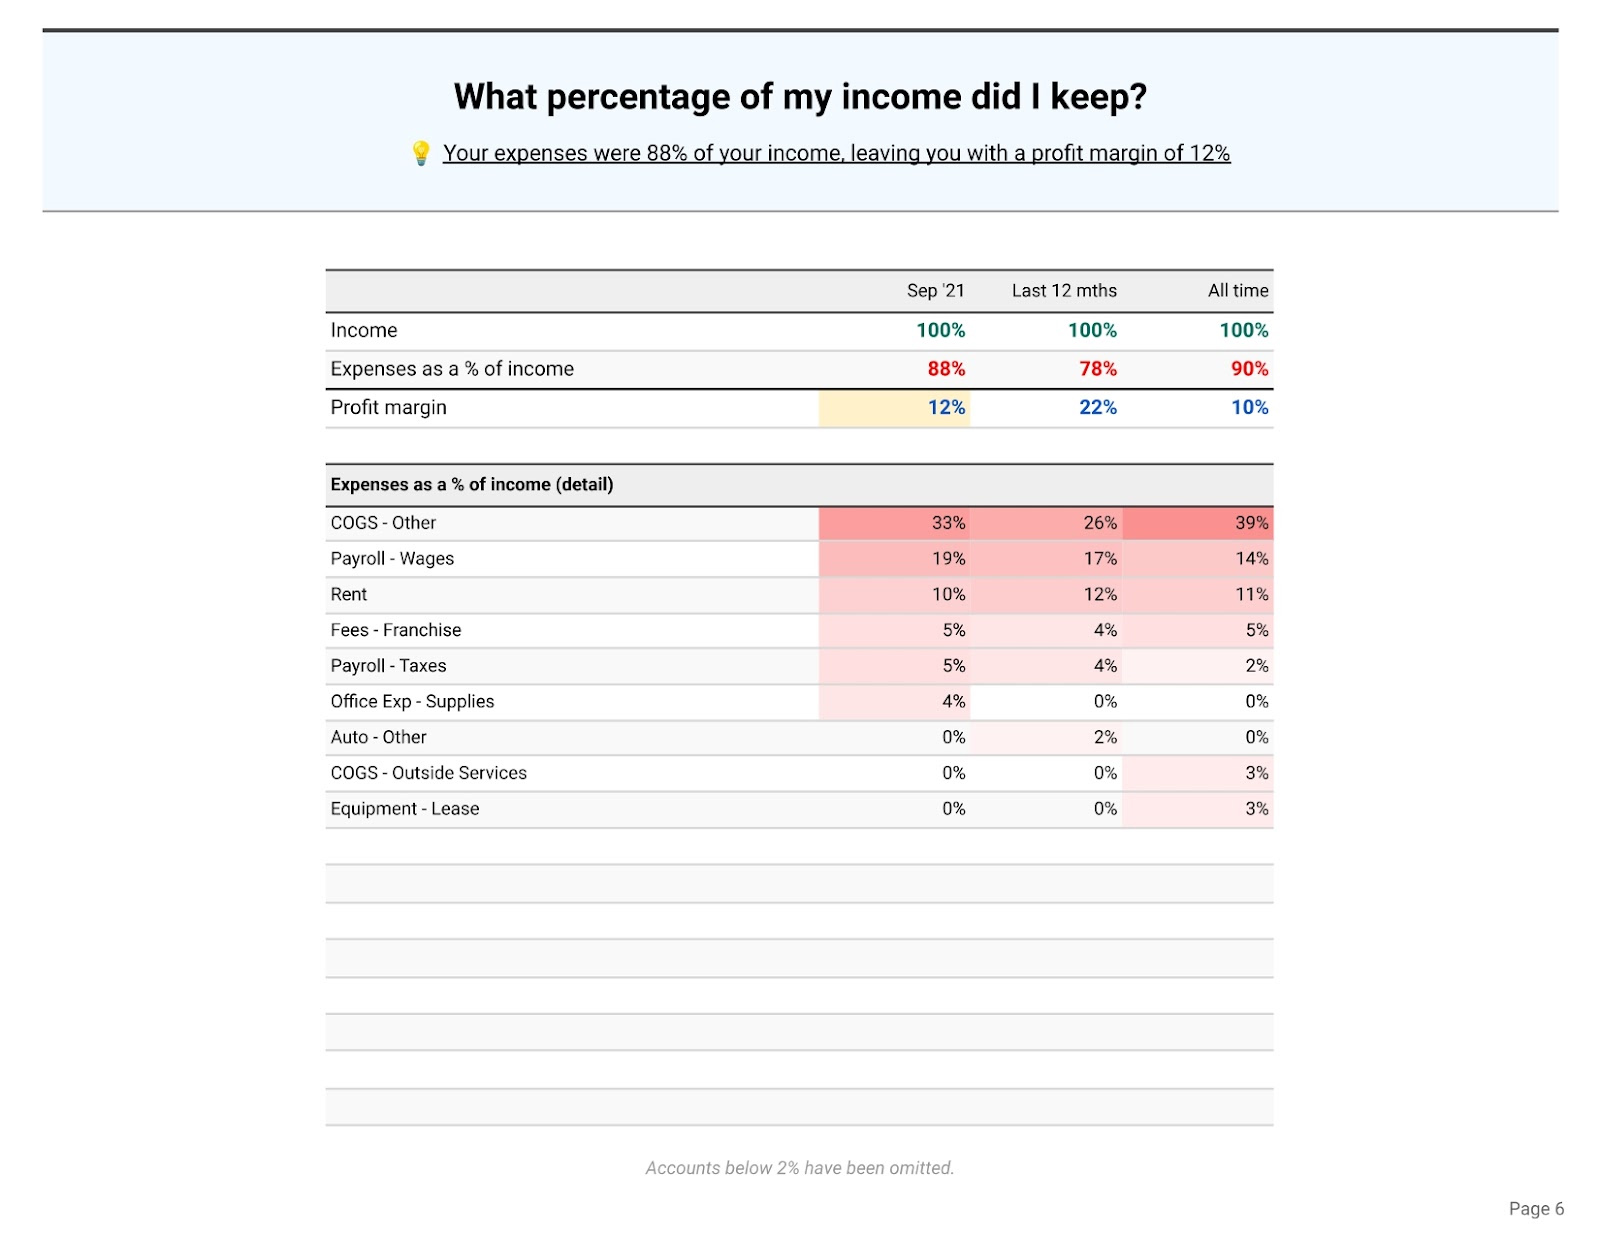 Merritt Bookkeeping Profit Margin and Expenses as a Percentage of Income.